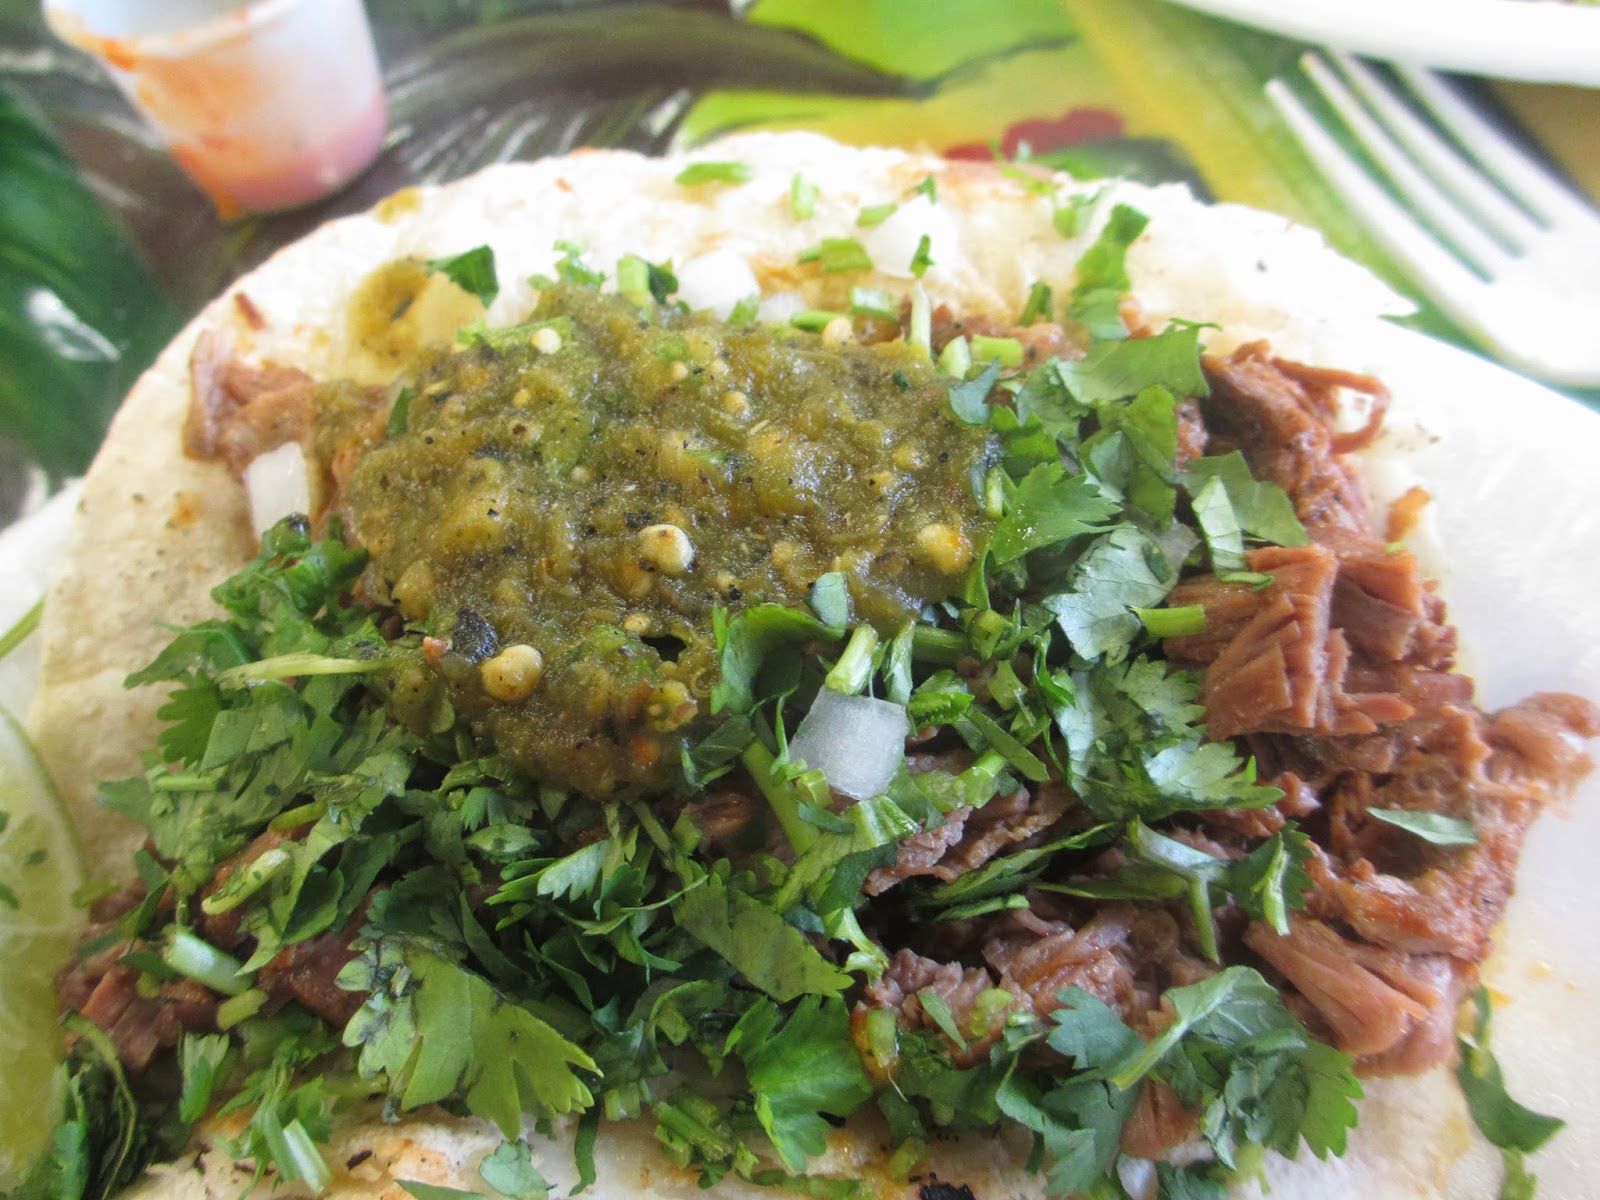 Cannundrums: Los Altos: A Gabacho Discovers Real Mexican Tacos